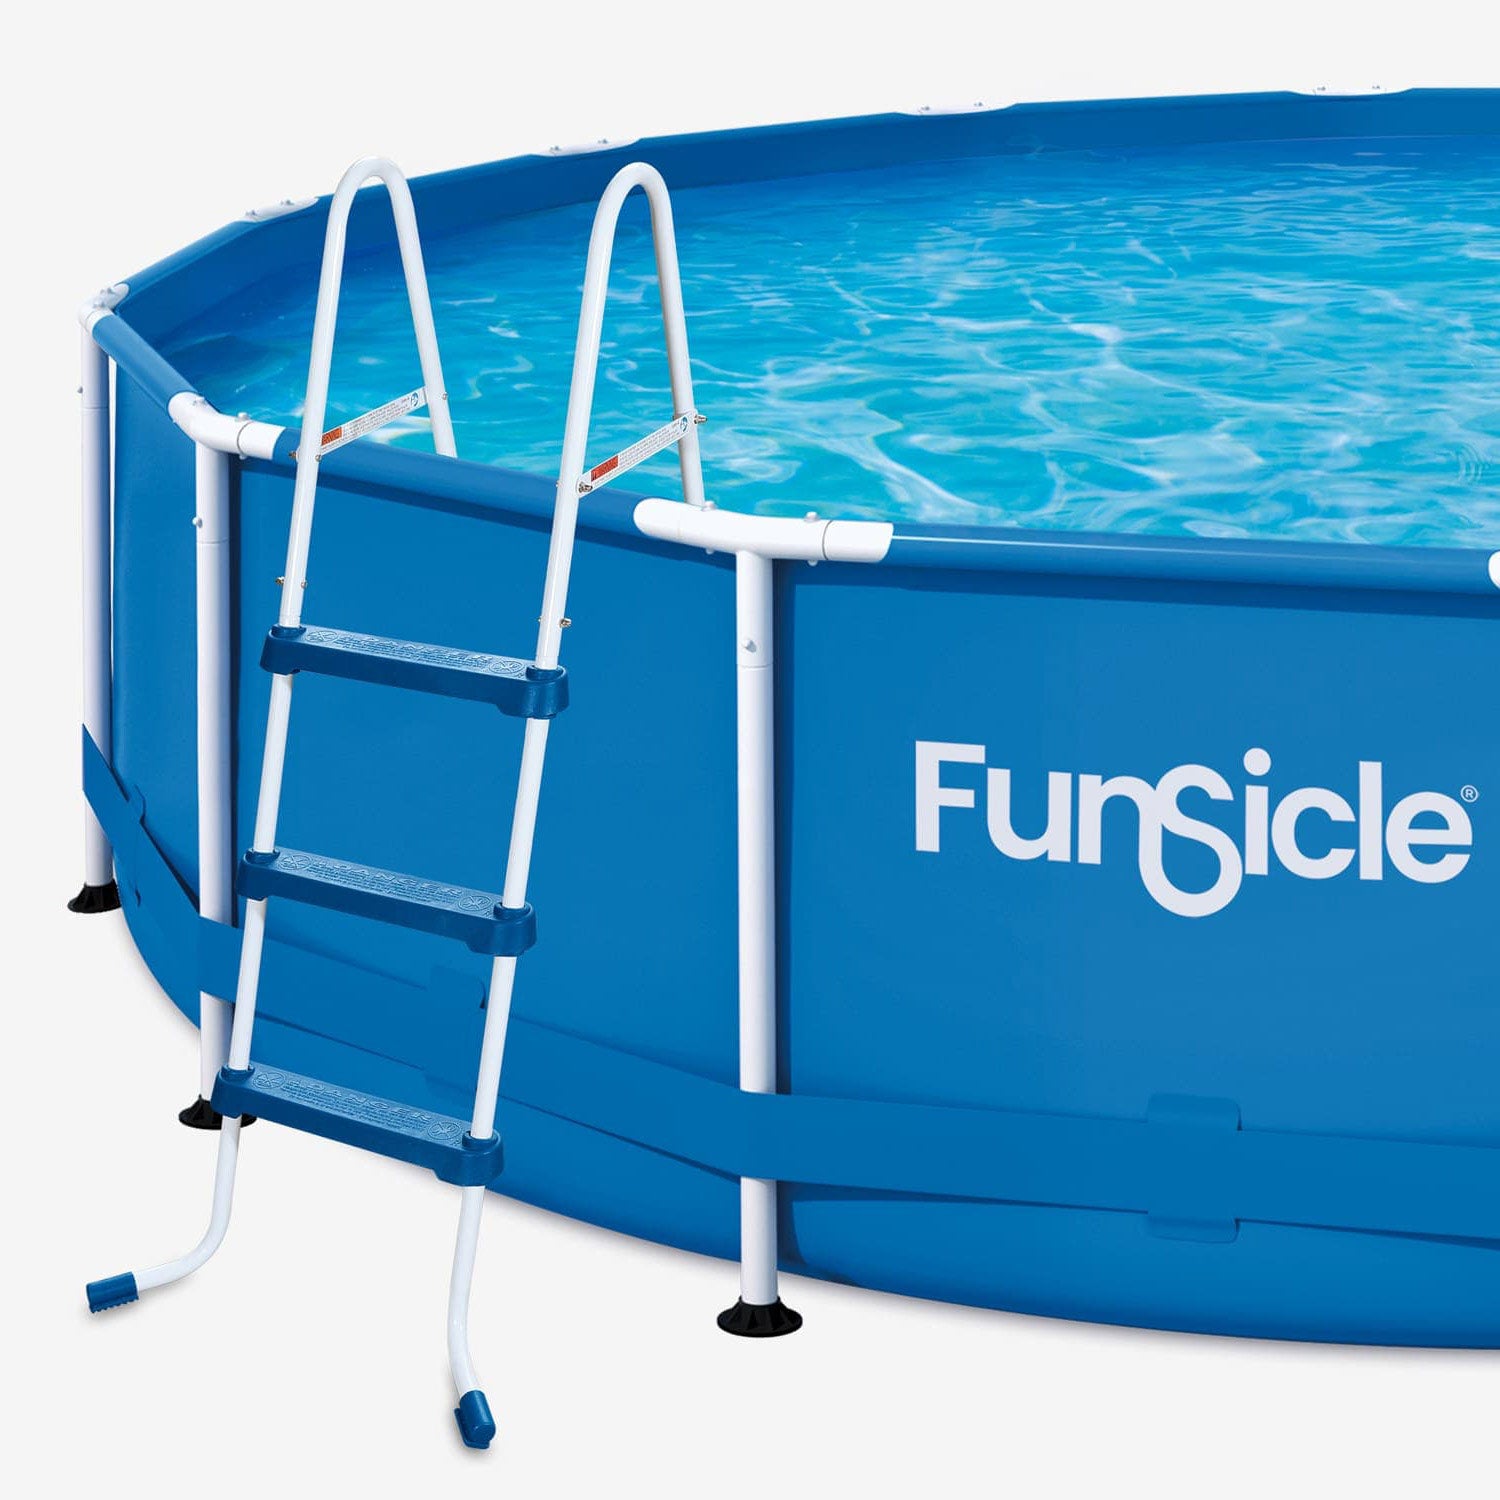 Funsicle 36" SureStep Ladder next to Funsicle Activity Pool